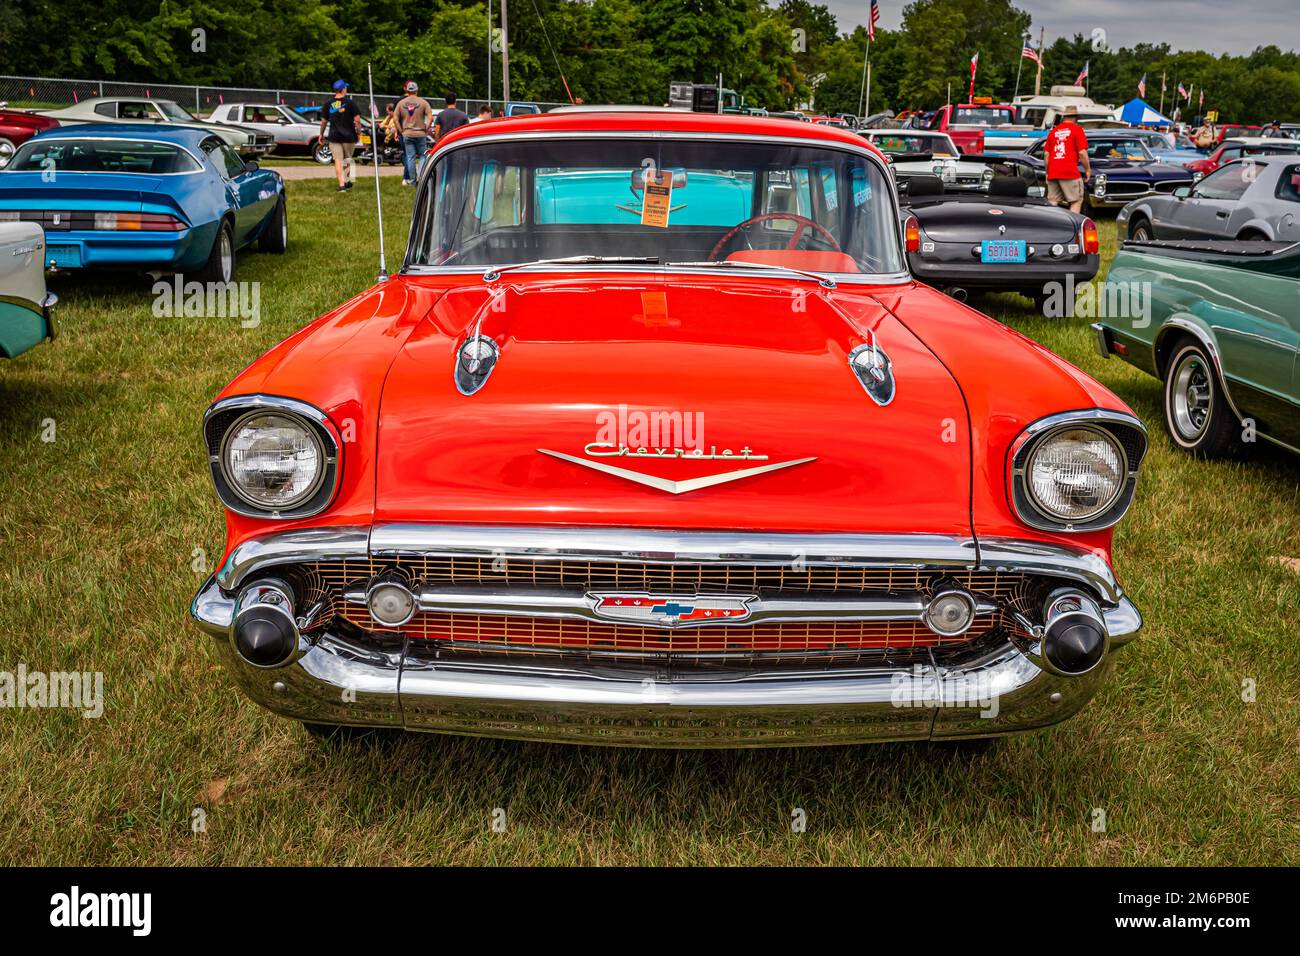 Iola, WI - July 07, 2022: High perspective front view of a 1957 Chevrolet Nomad Station Wagon at a local car show. Stock Photo